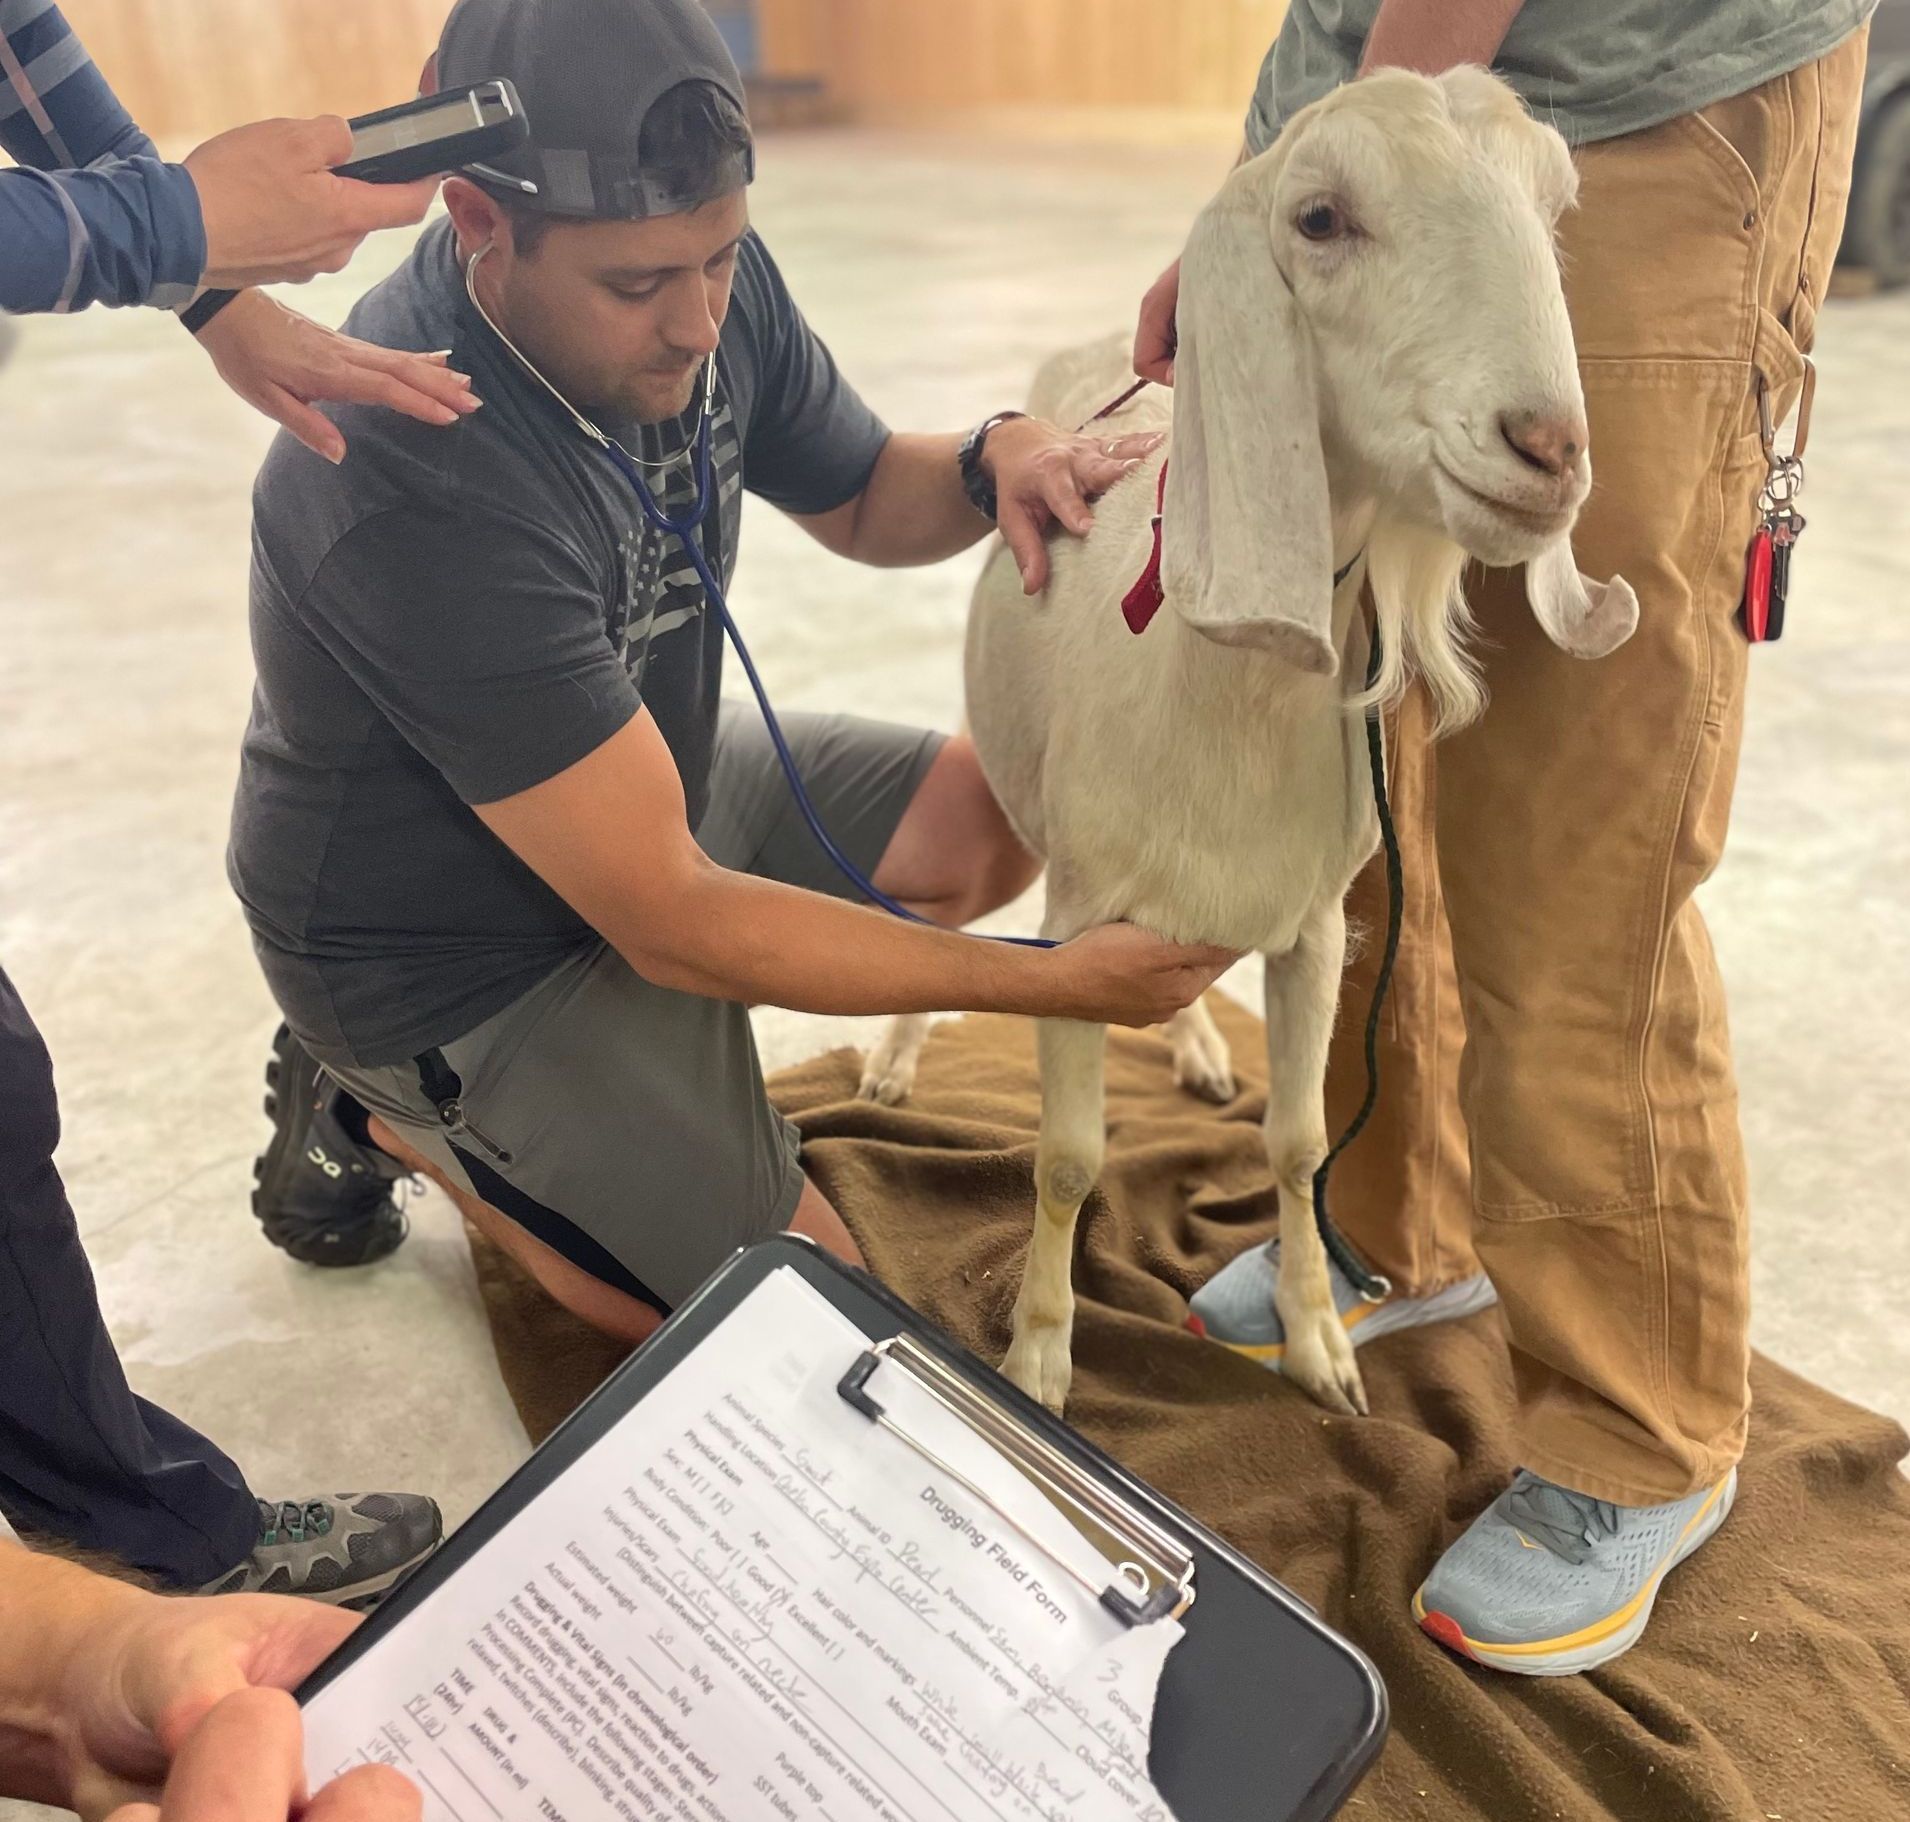 TPR Lab - Practice lab with live animals to prepare for chemical immobilization lab.